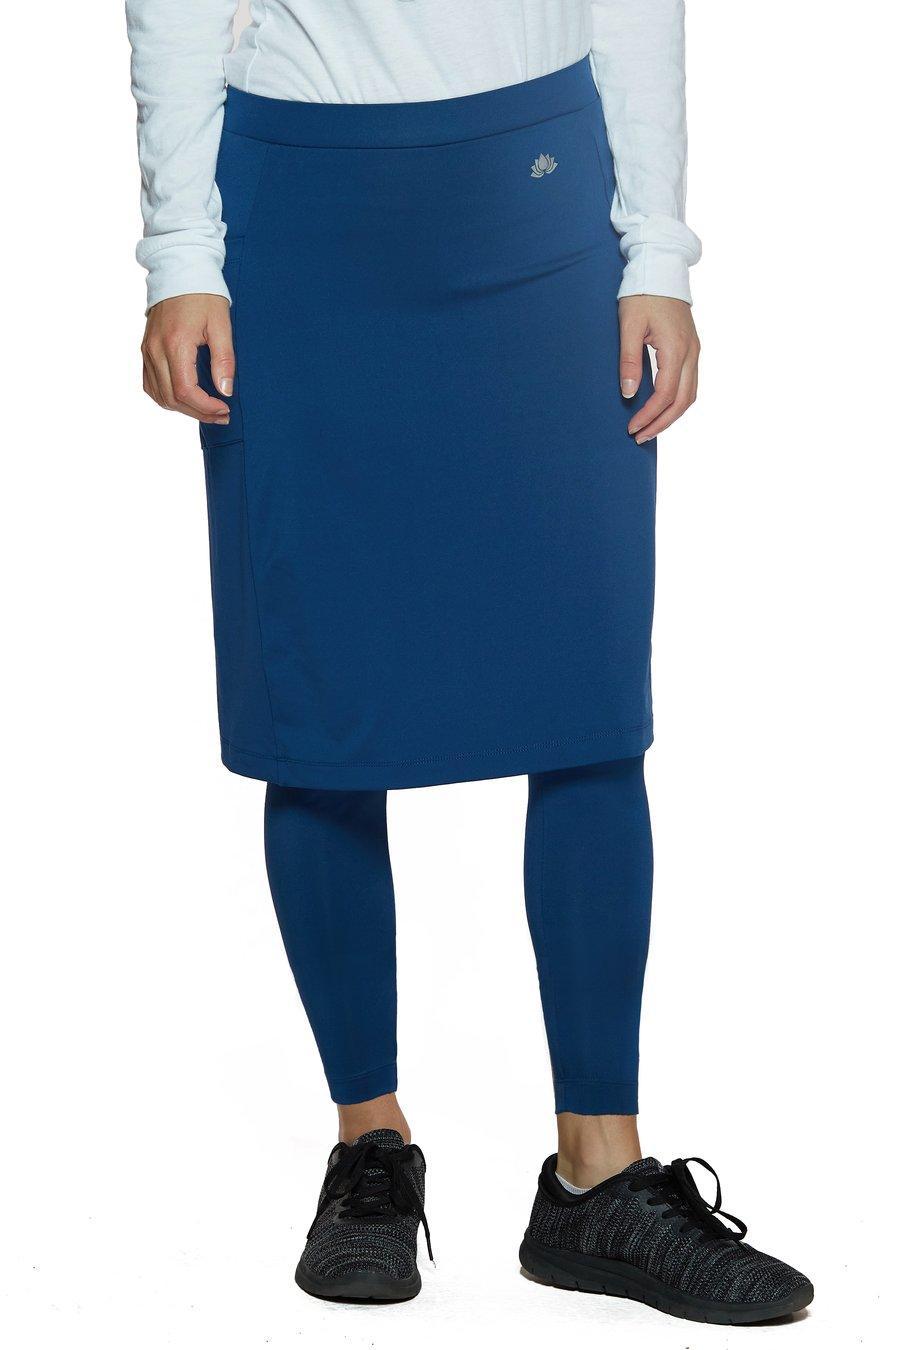 Ankle Fit Snoga Athletic Skirt in Navy